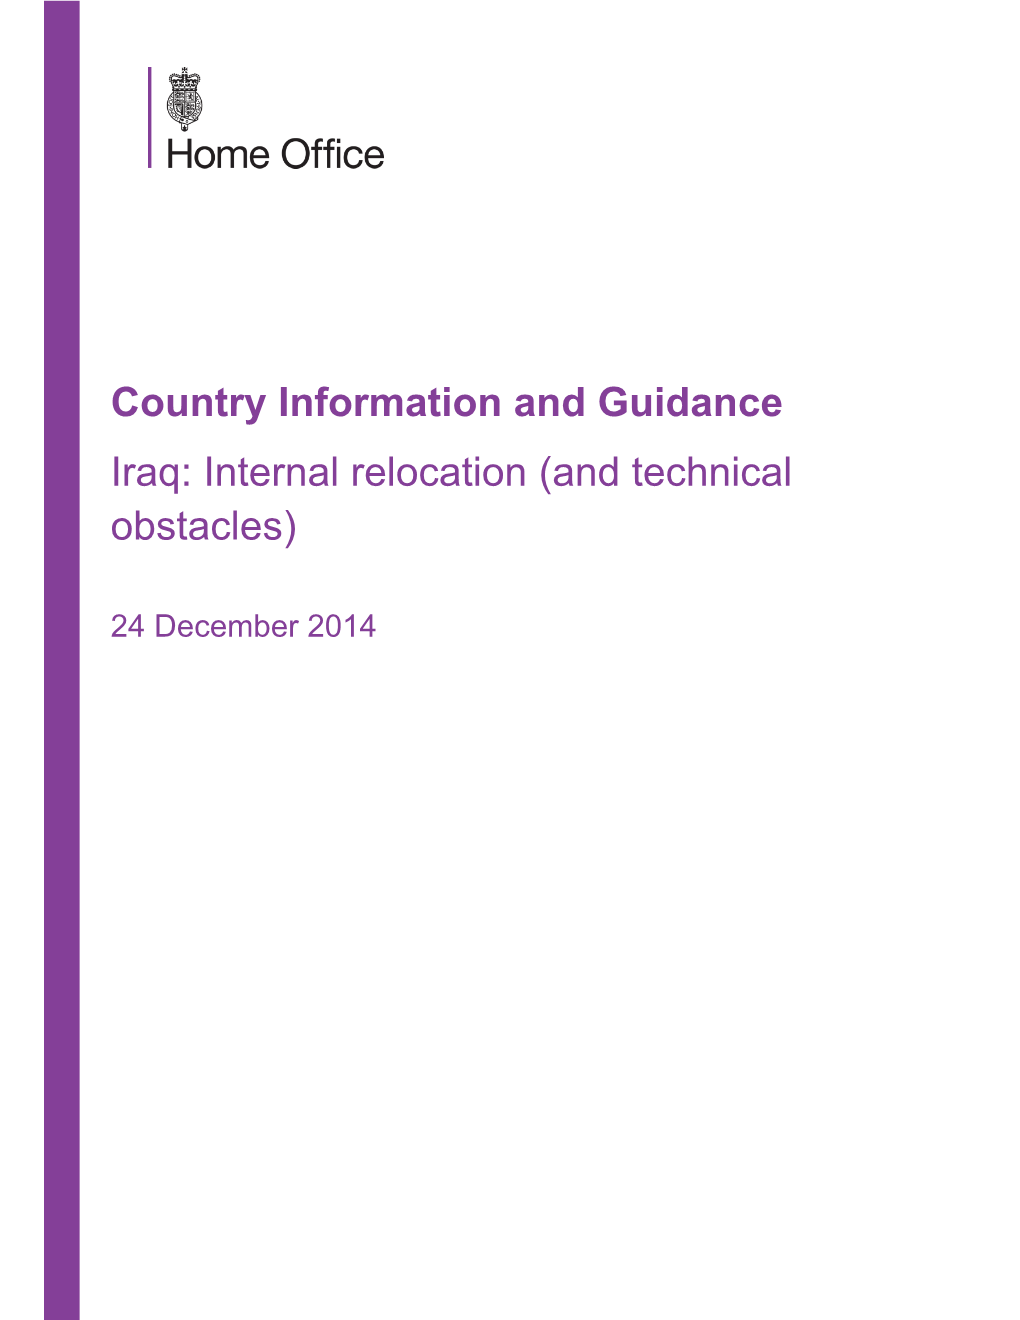 Country Information and Guidance Iraq: Internal Relocation (And Technical Obstacles)